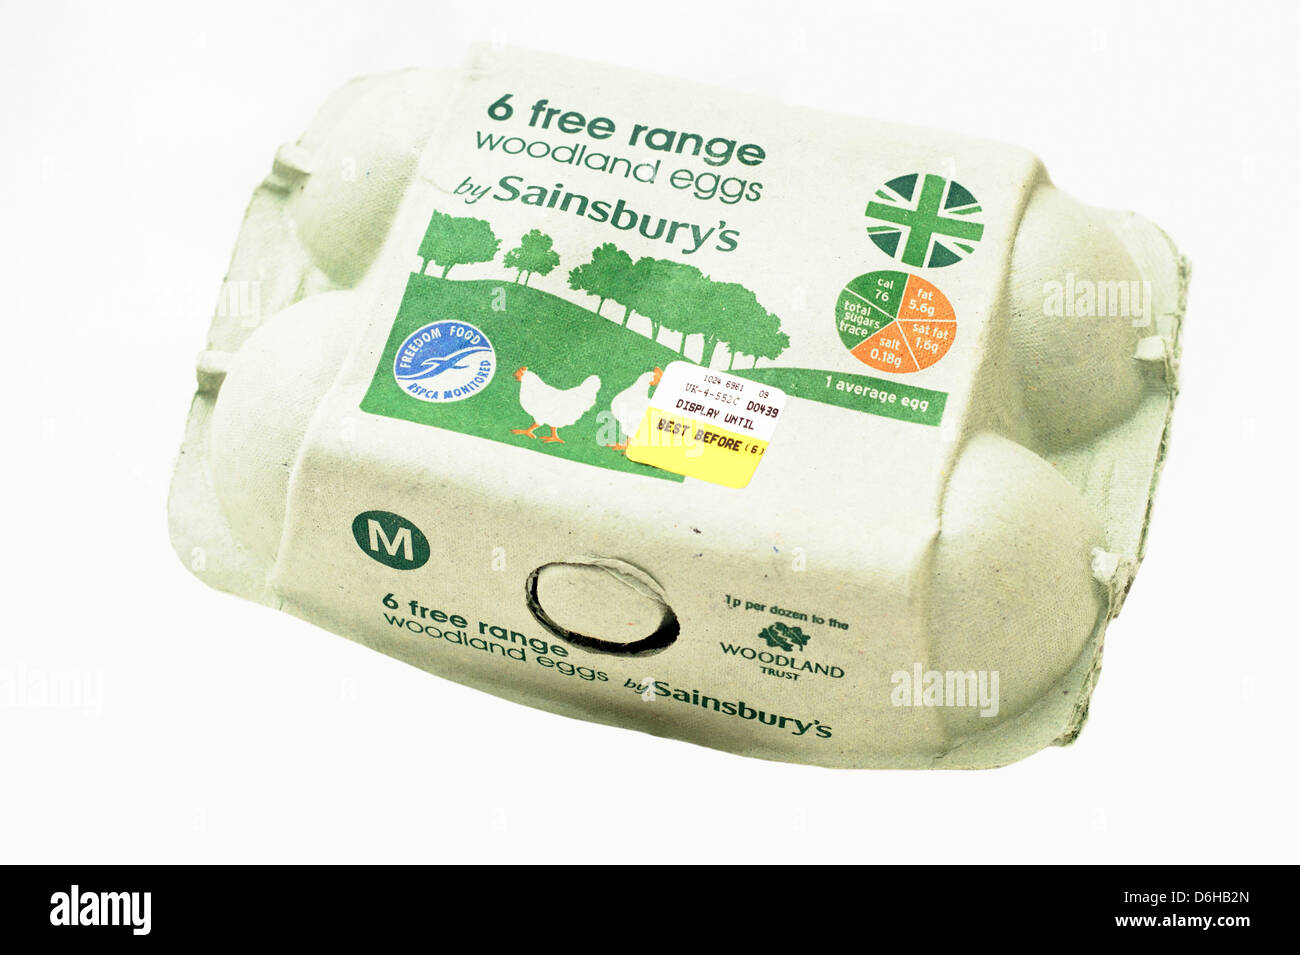 A box of Sainsbury's woodland free eggs with logos of traffic lights system British symbol & RSPCA freedom food monitored Stock Photo